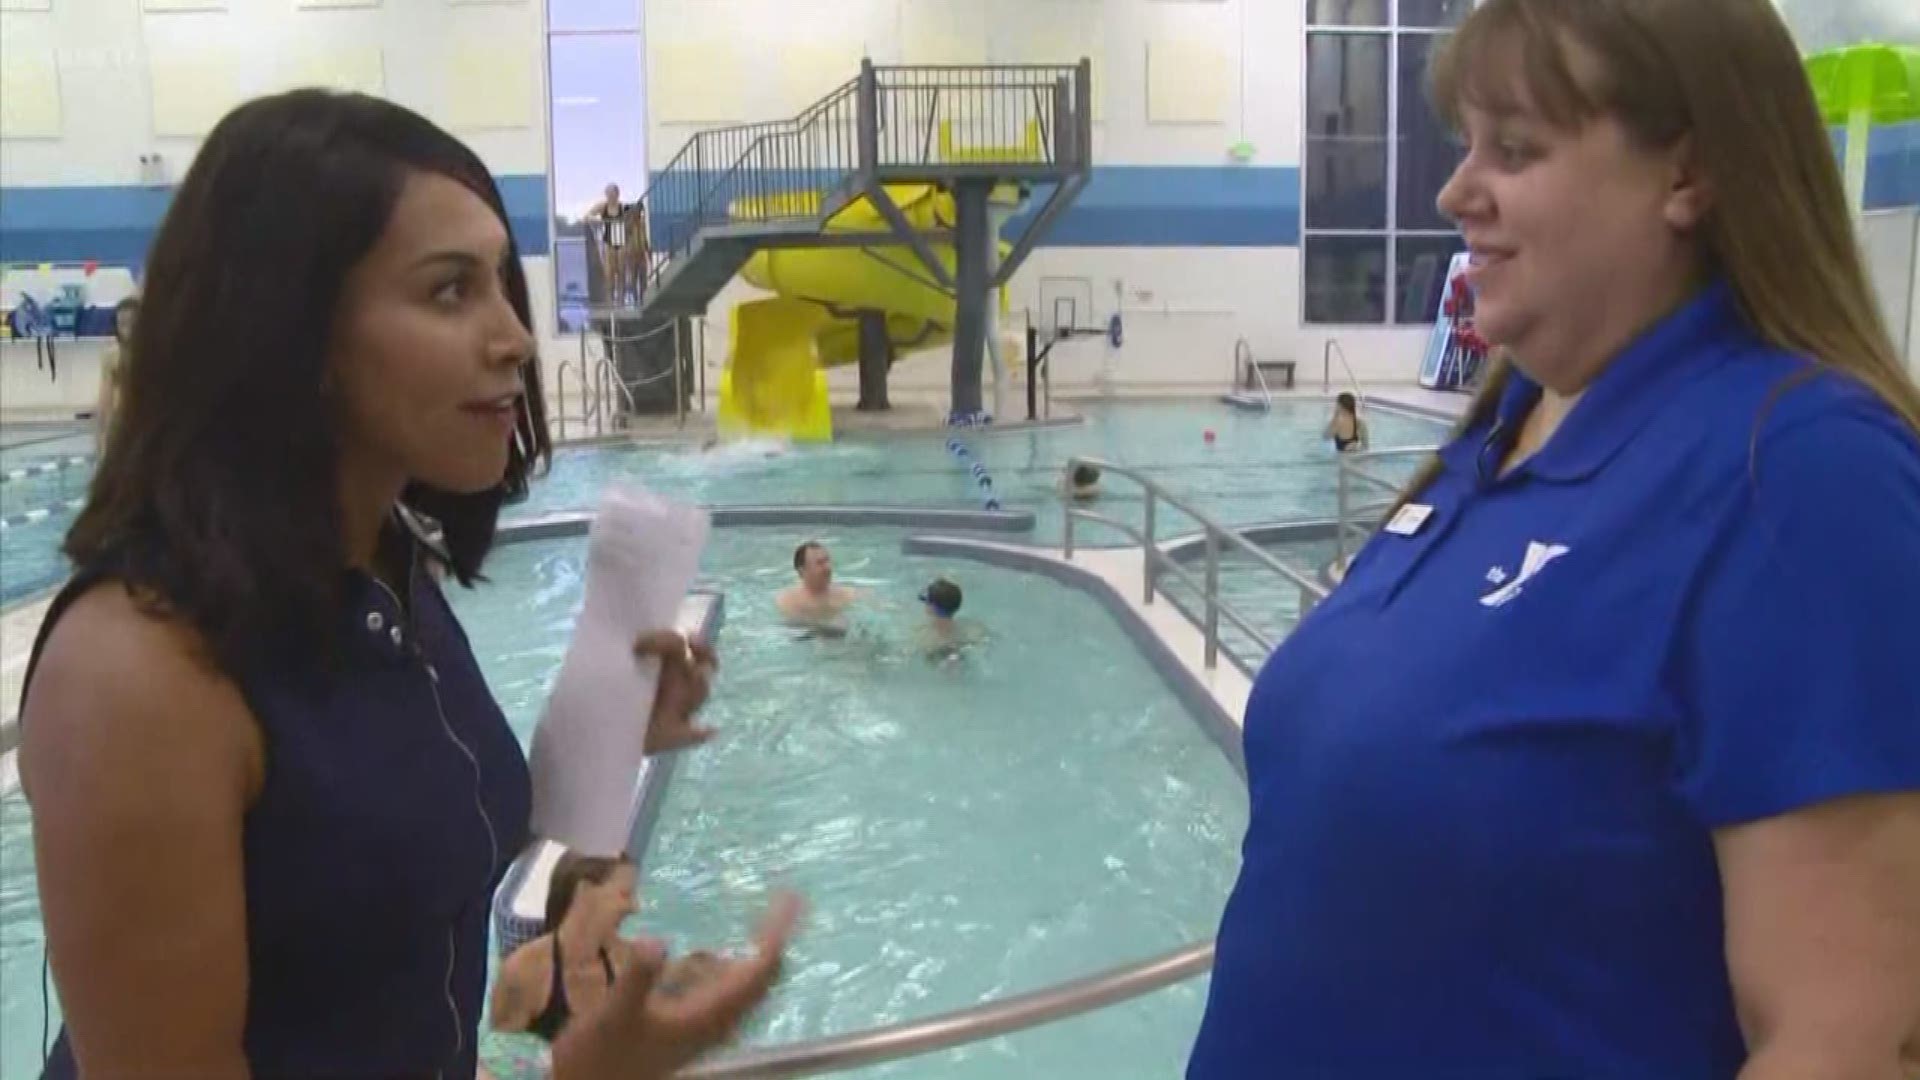 KARE 11's Kiya Edwards visited the YMCA in St. Paul to get some summer swimming safety tips ahead of the July 4th holiday. https://kare11.tv/2lPSiK8